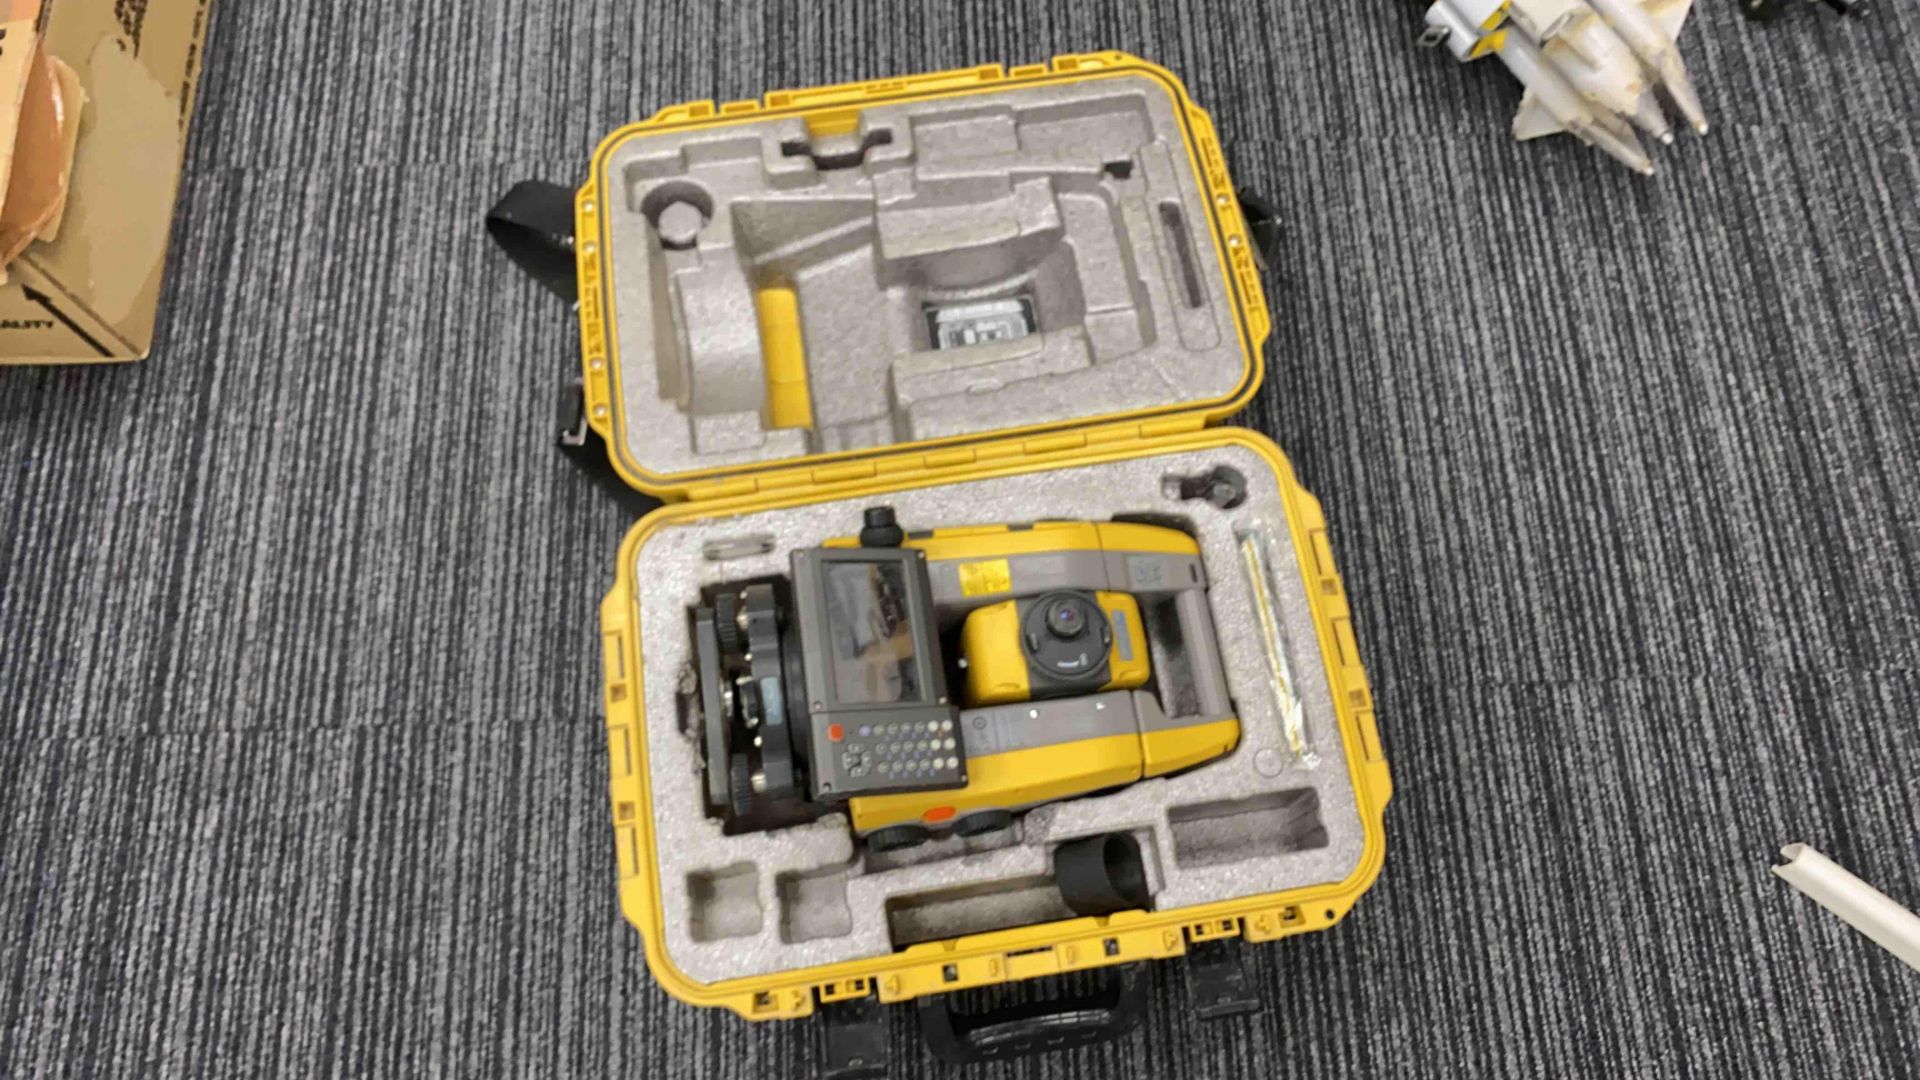 Topcon GT Series XQ001135 robotic total station laser imaging surveying equipment with 3inch - Image 5 of 6